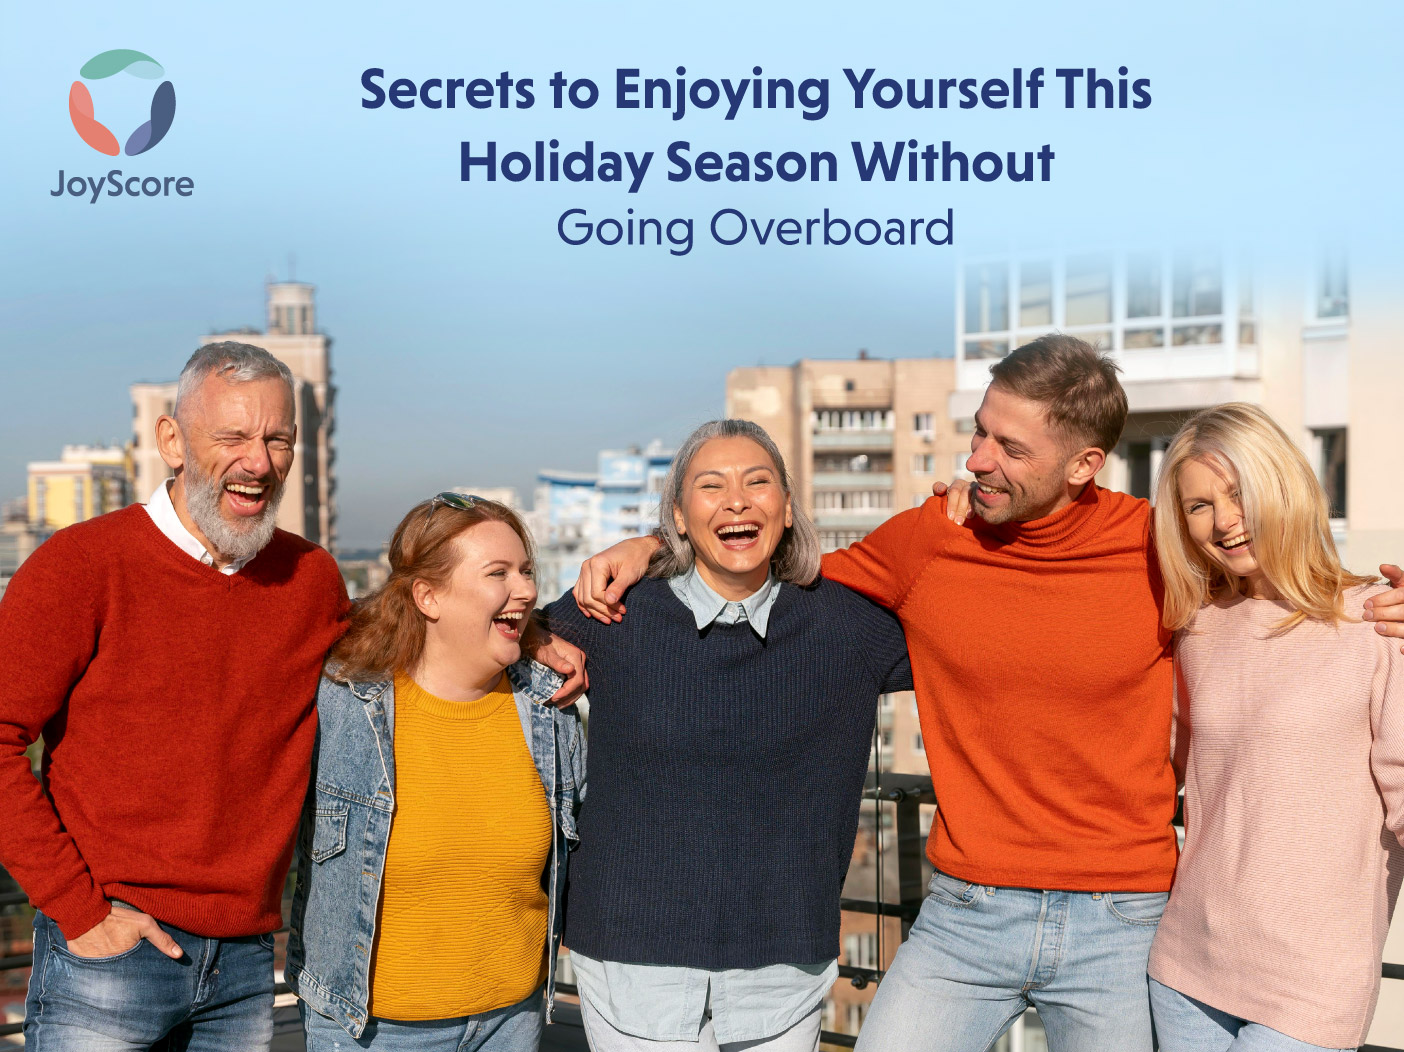 The Secrets to Enjoying Yourself This Holiday Season Without Going Overboard